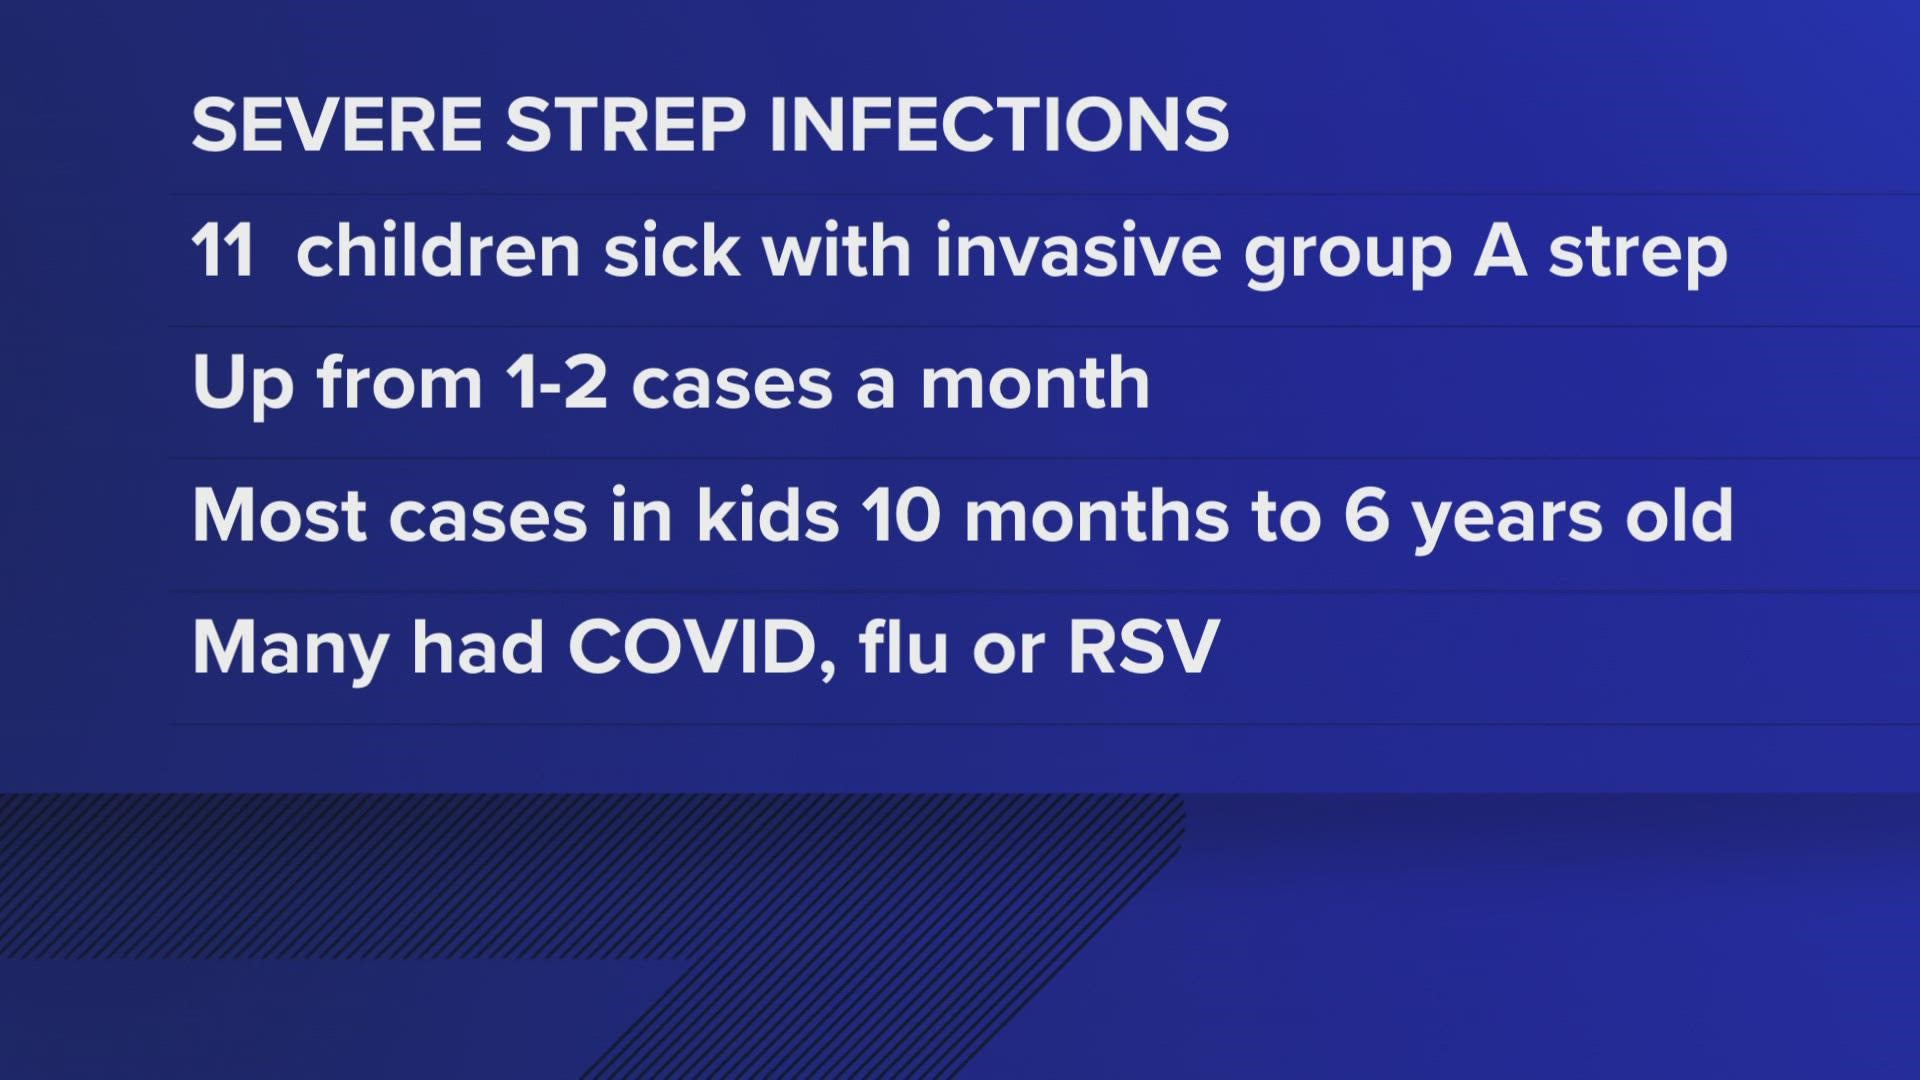 Two children have died in Colorado from severe group A strep infections since November. Eleven other children have been sick with "invasive" strep.